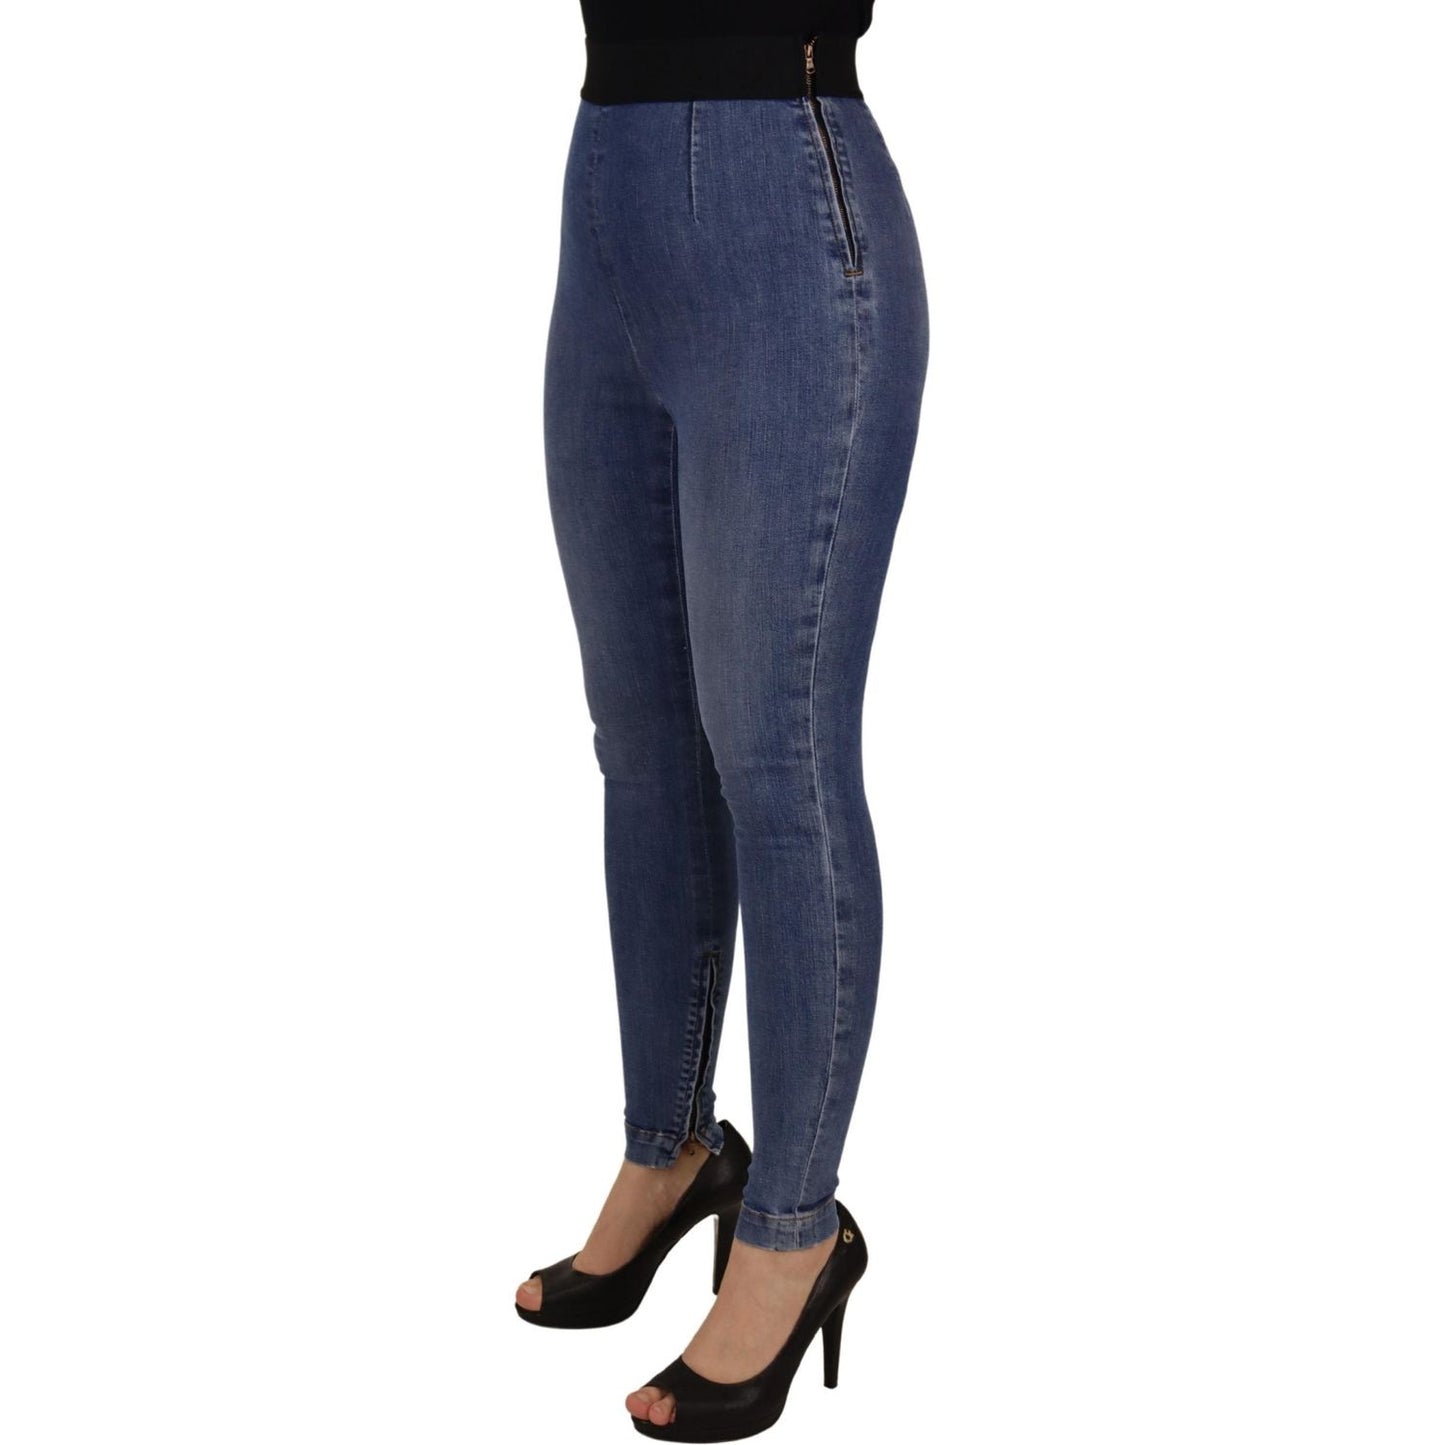 Dolce & GabbanaHigh Waist Skinny Denim The latest in style, these skinny jeans take it up a notch with a flattering high waist. Made of 98% cotton and 2% elastane, they offer a snug yet comfortable stretch fit. Country of origin: IT, you'll be donning a p